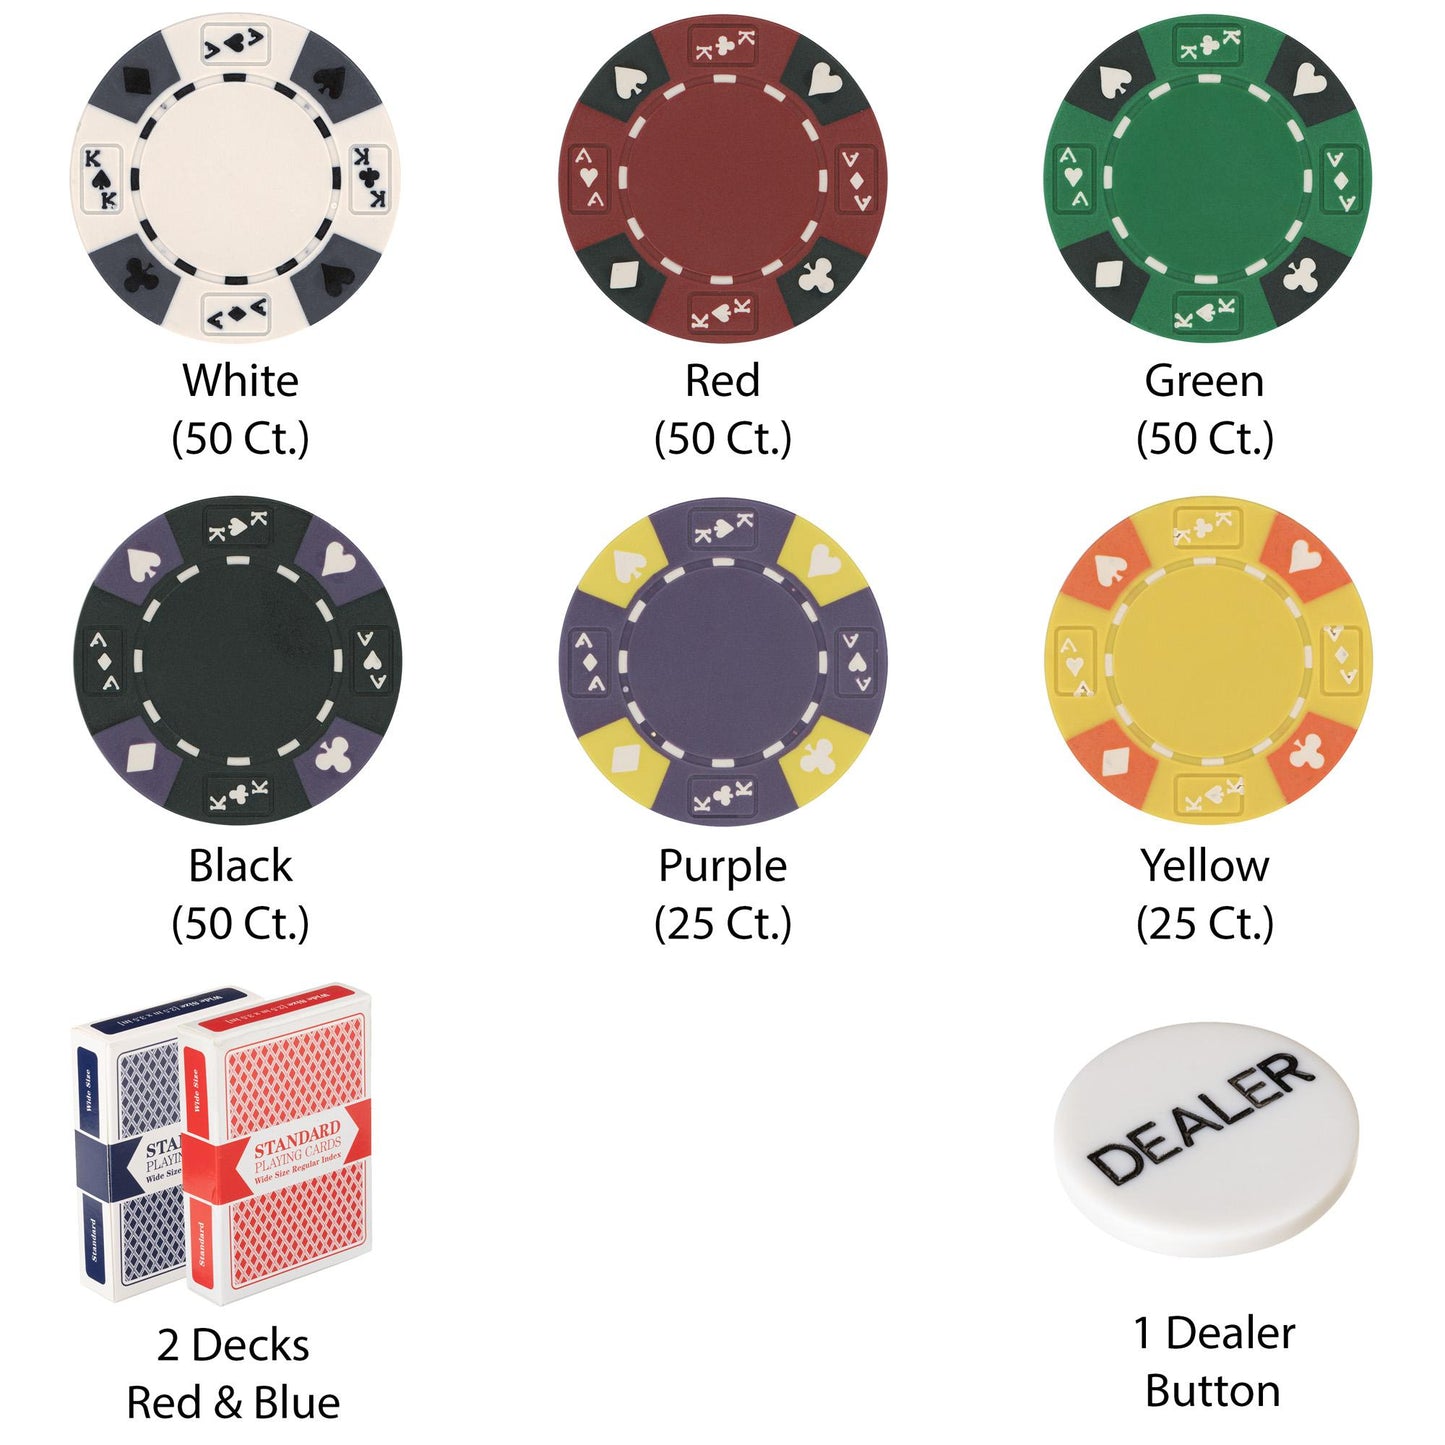 300 Ace King Suited Poker Chips with Walnut Case